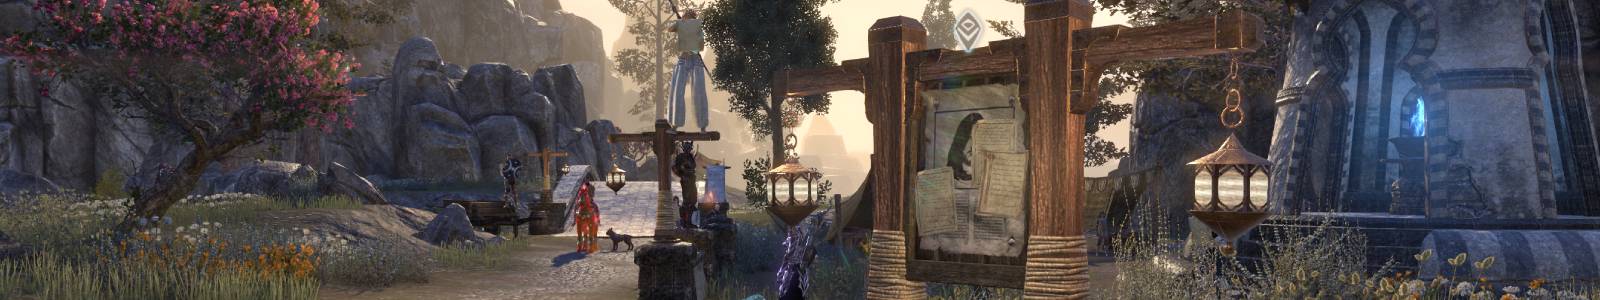 ESO News - Up to date news about the Elder Scrolls Online header